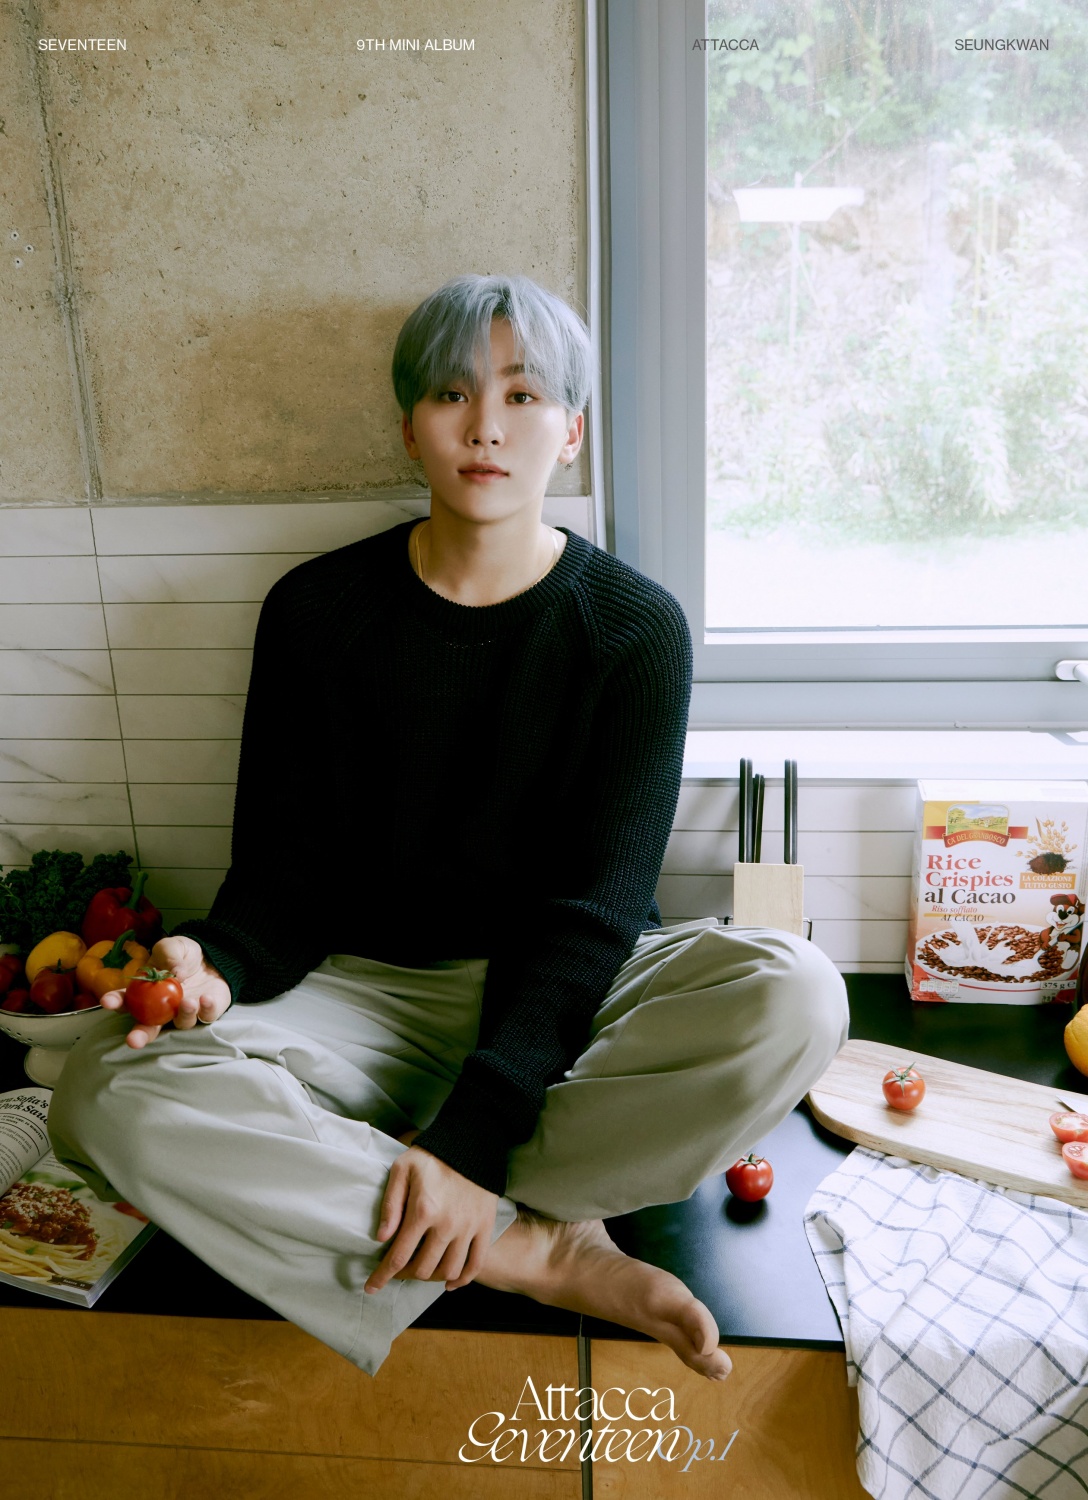 Seventeen, more mature beauty... 'Attacca' official photo